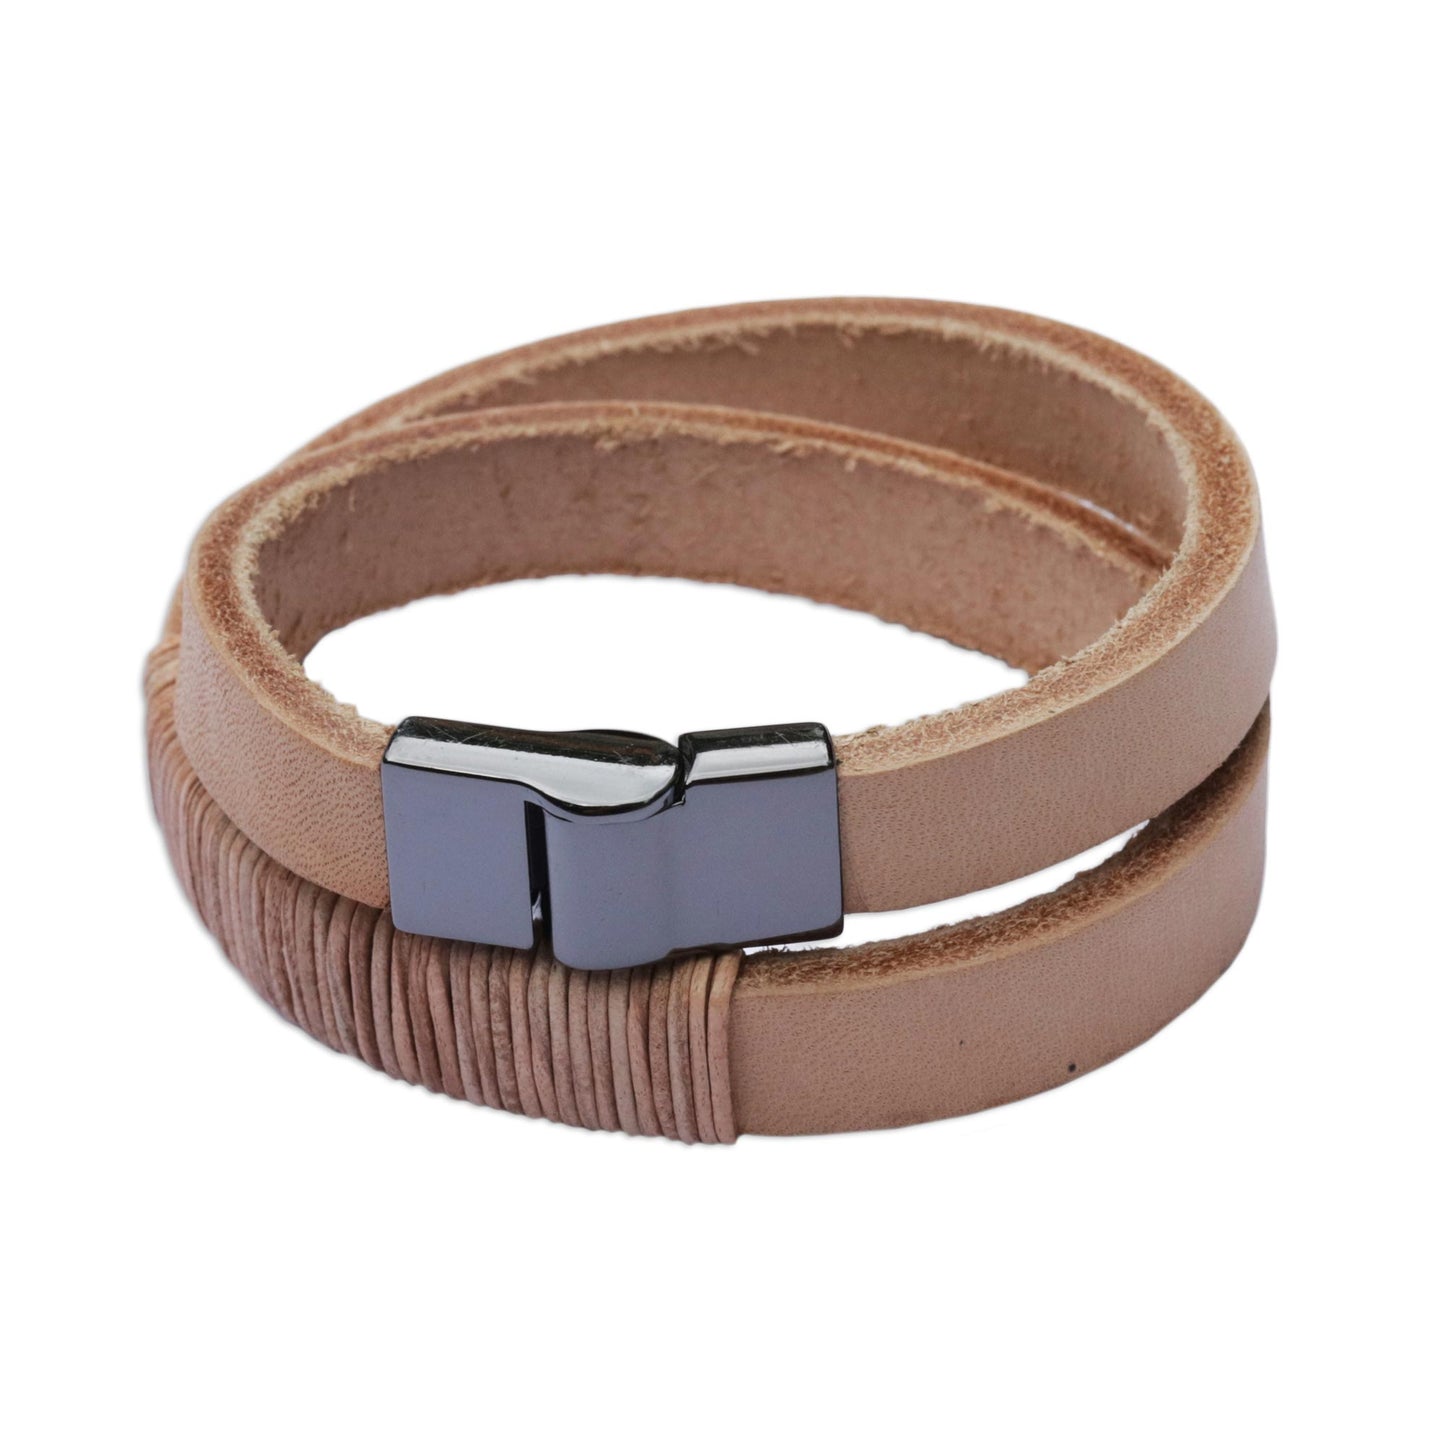 Carioca Chic Wrap Bracelet in Buff-Colored Leather